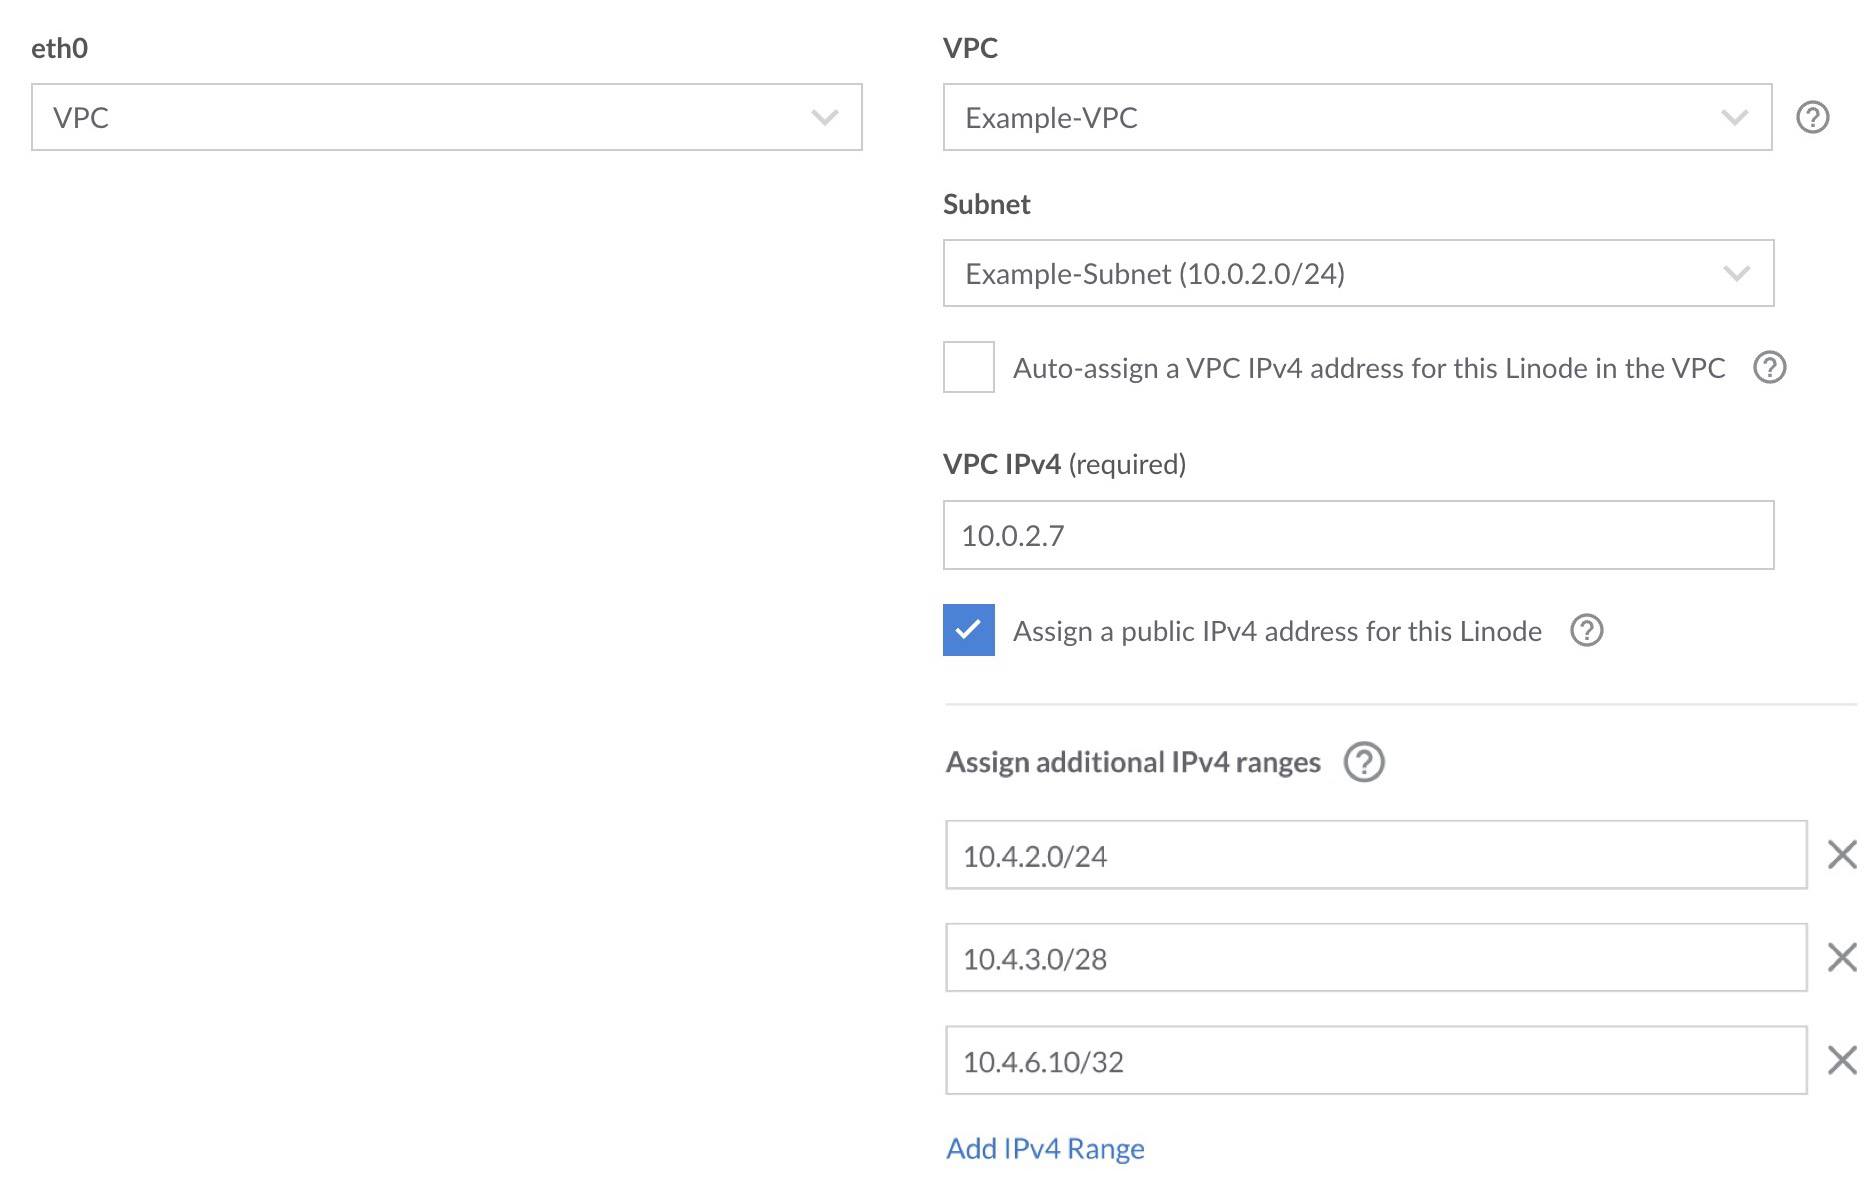 Screenshot of a VPC network interface in the Configuration Profile of a Compute Instance